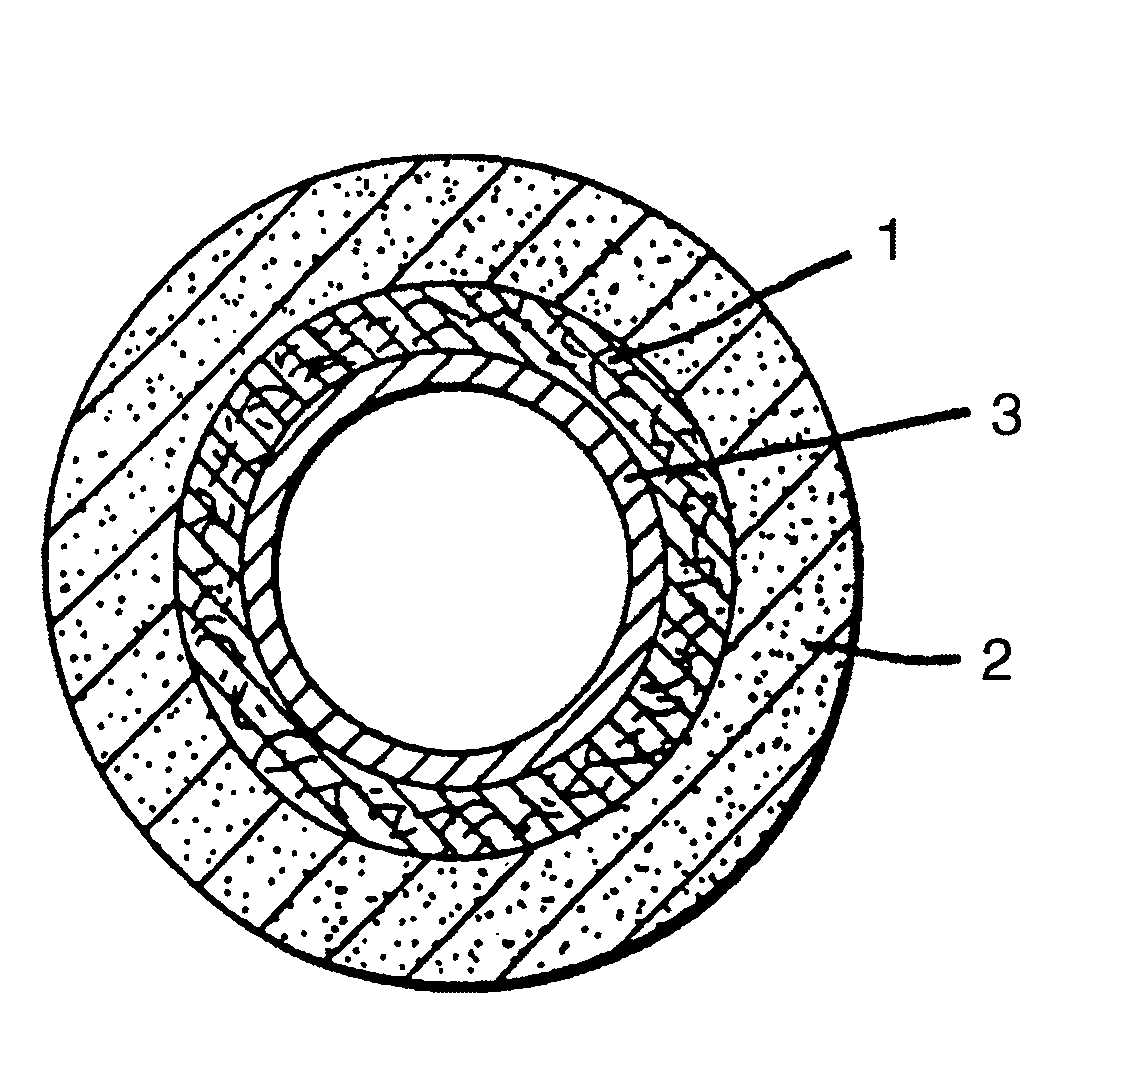 Orthopedic cast system and method